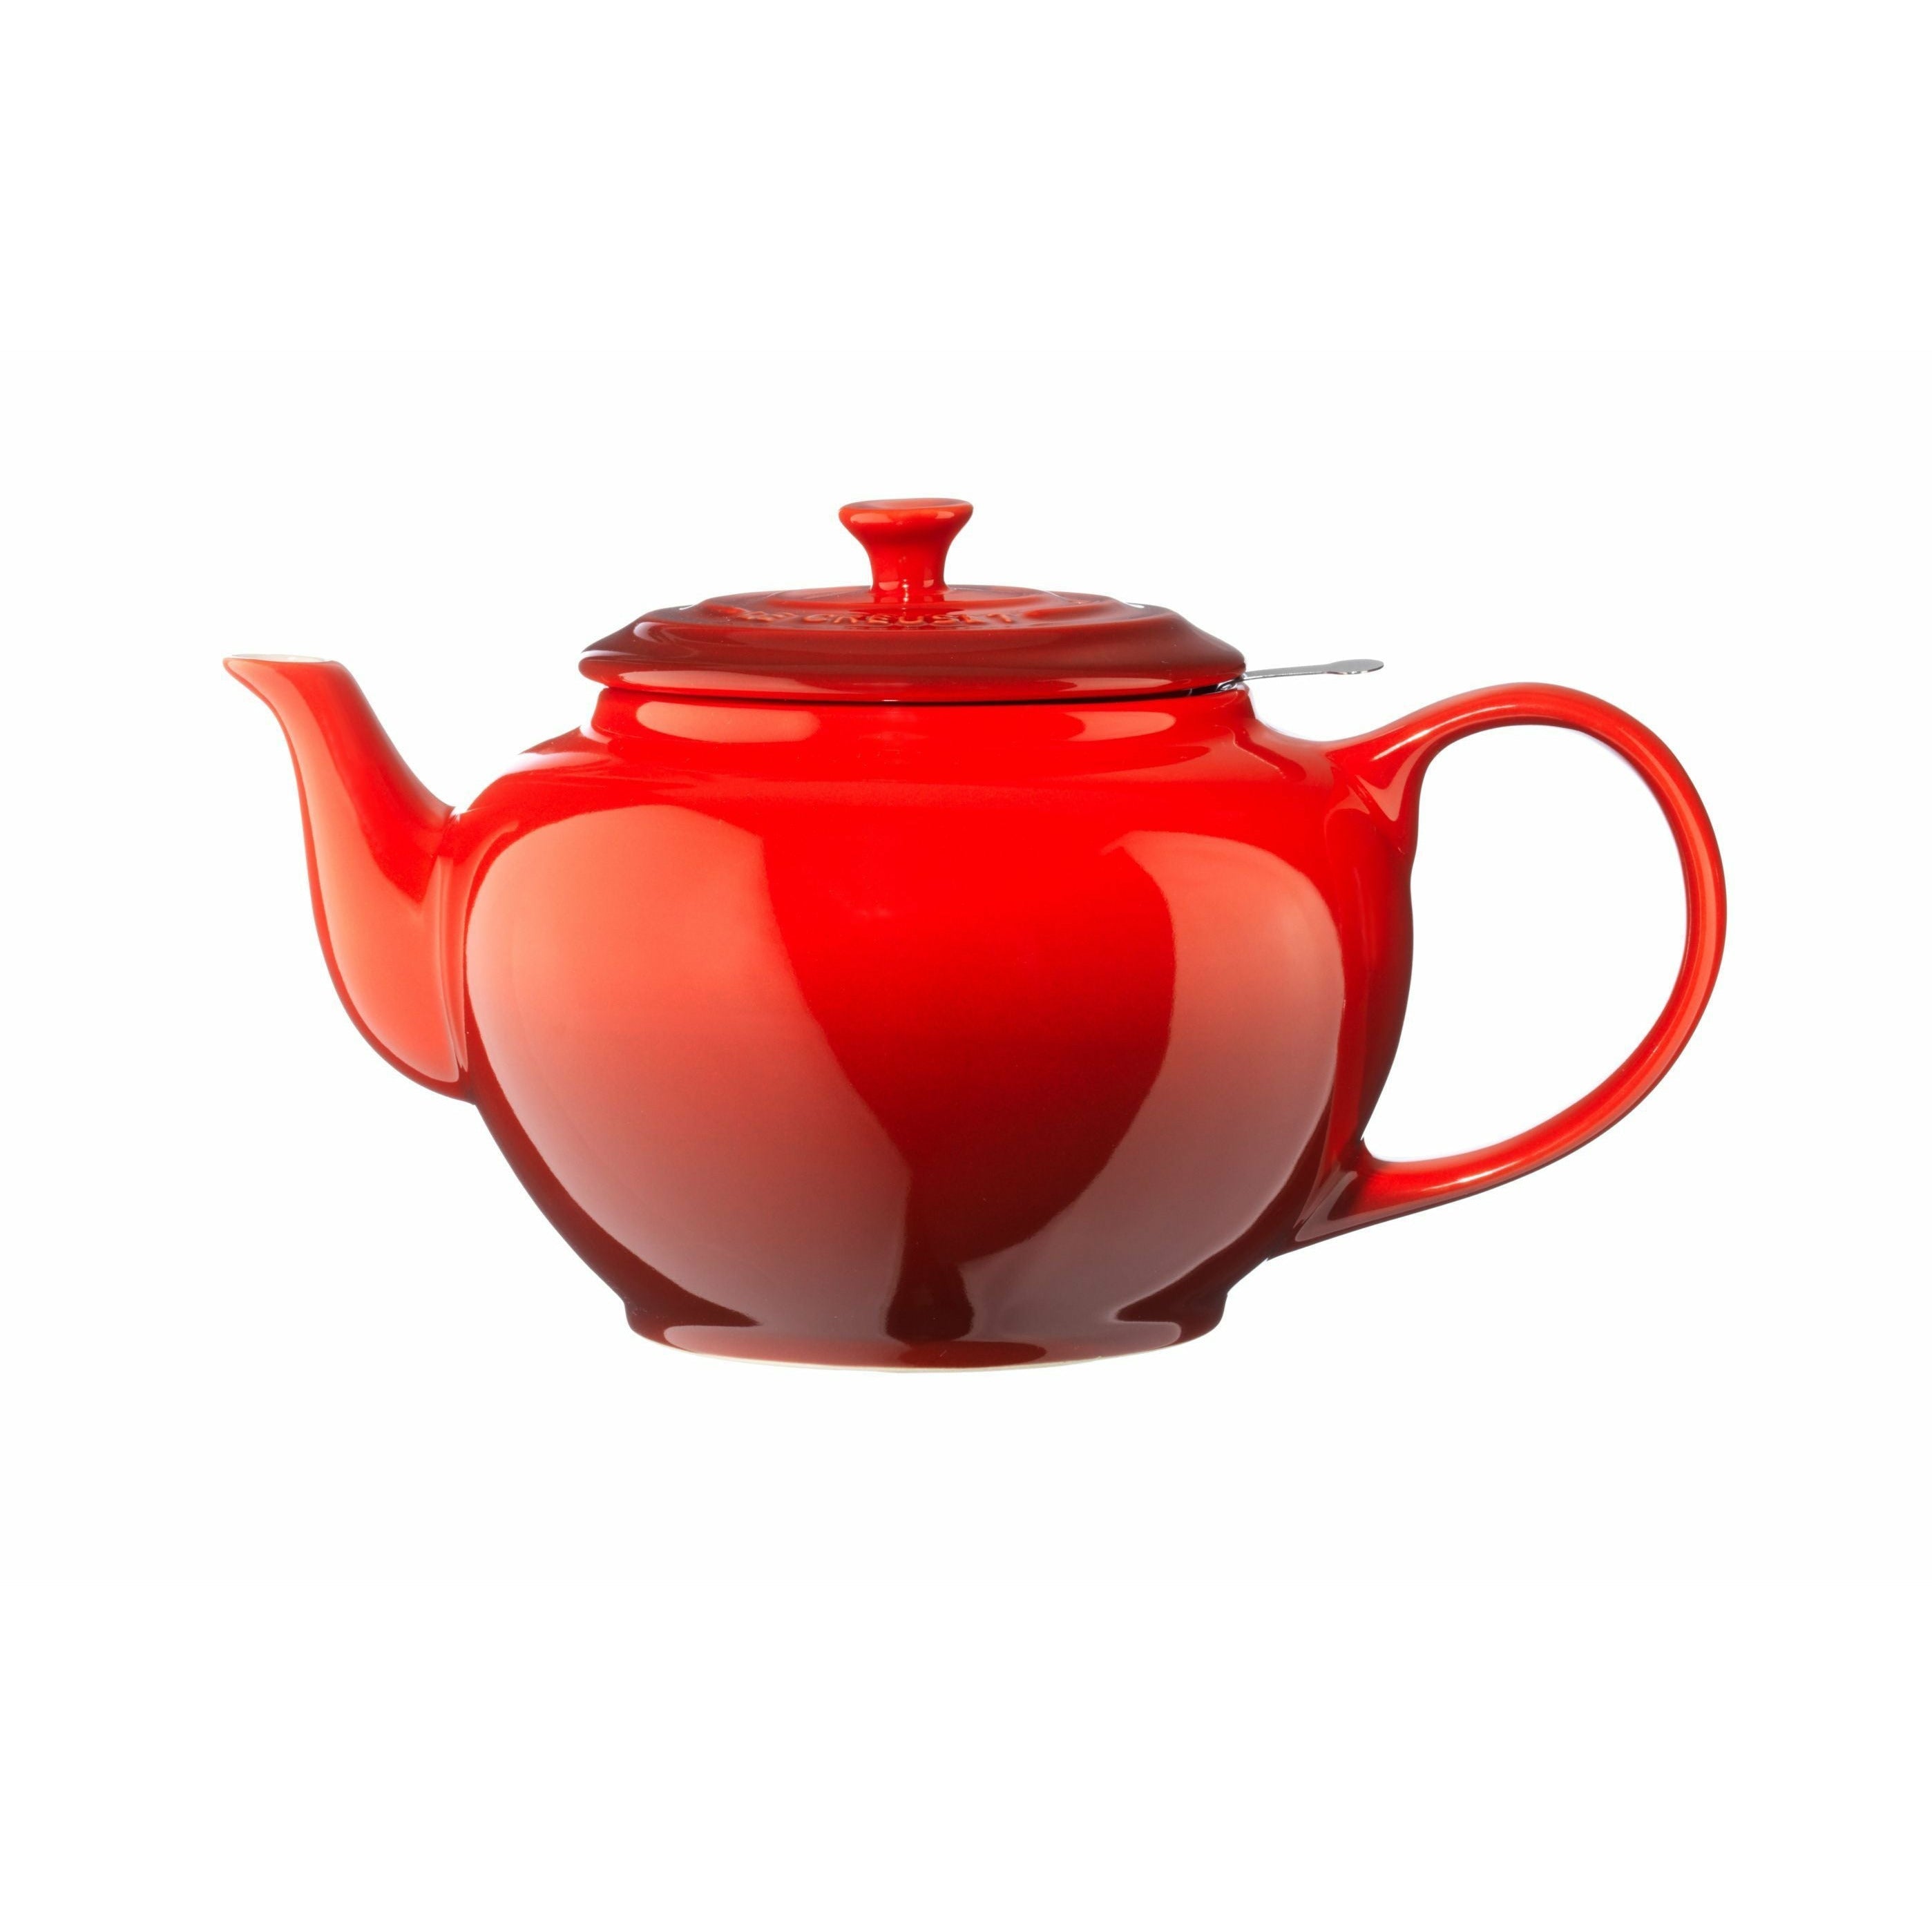 Le Creuset Classic Jug With Sieve 1.3 L, Cherry Red